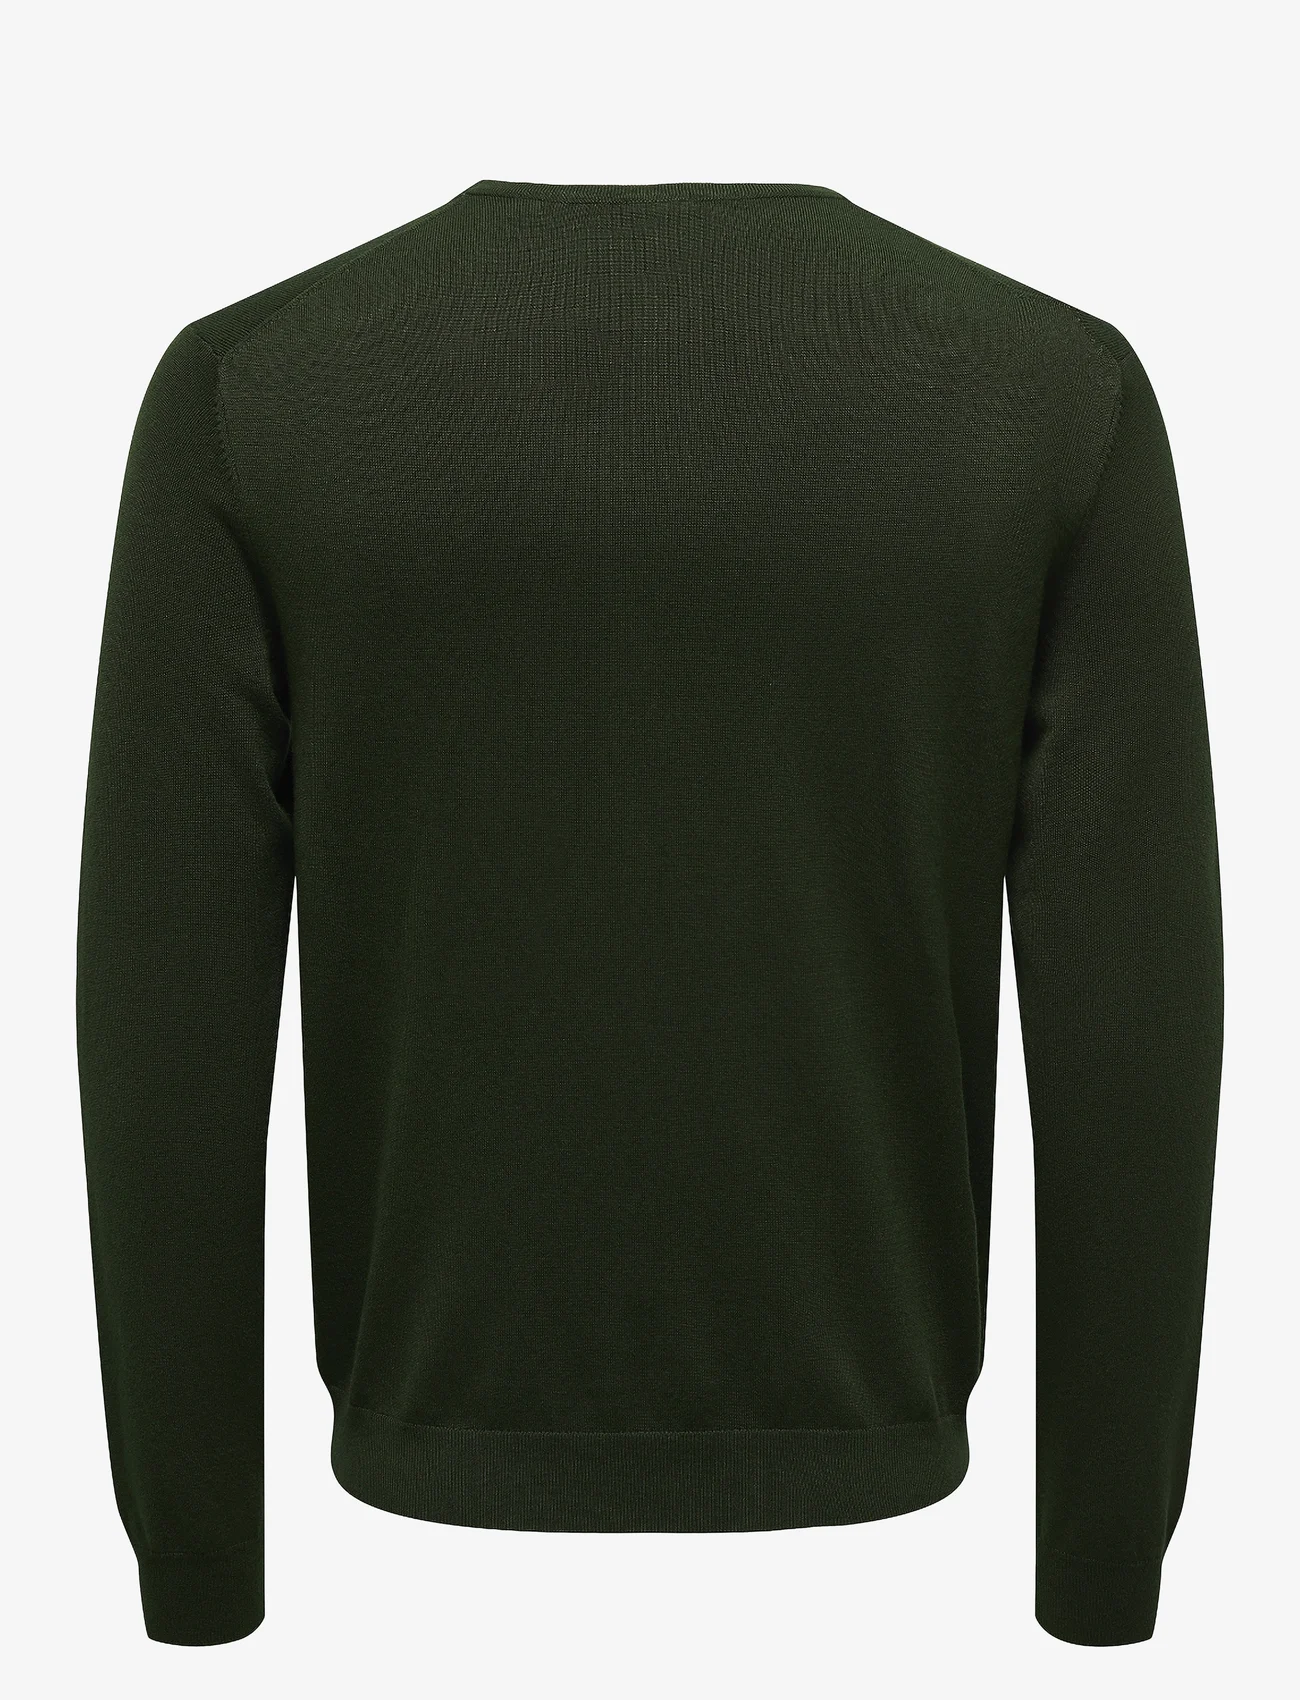 ONLY & SONS - ONSWYLER LIFE REG 14 LS CREW KNIT NOOS - basic knitwear - rosin - 1